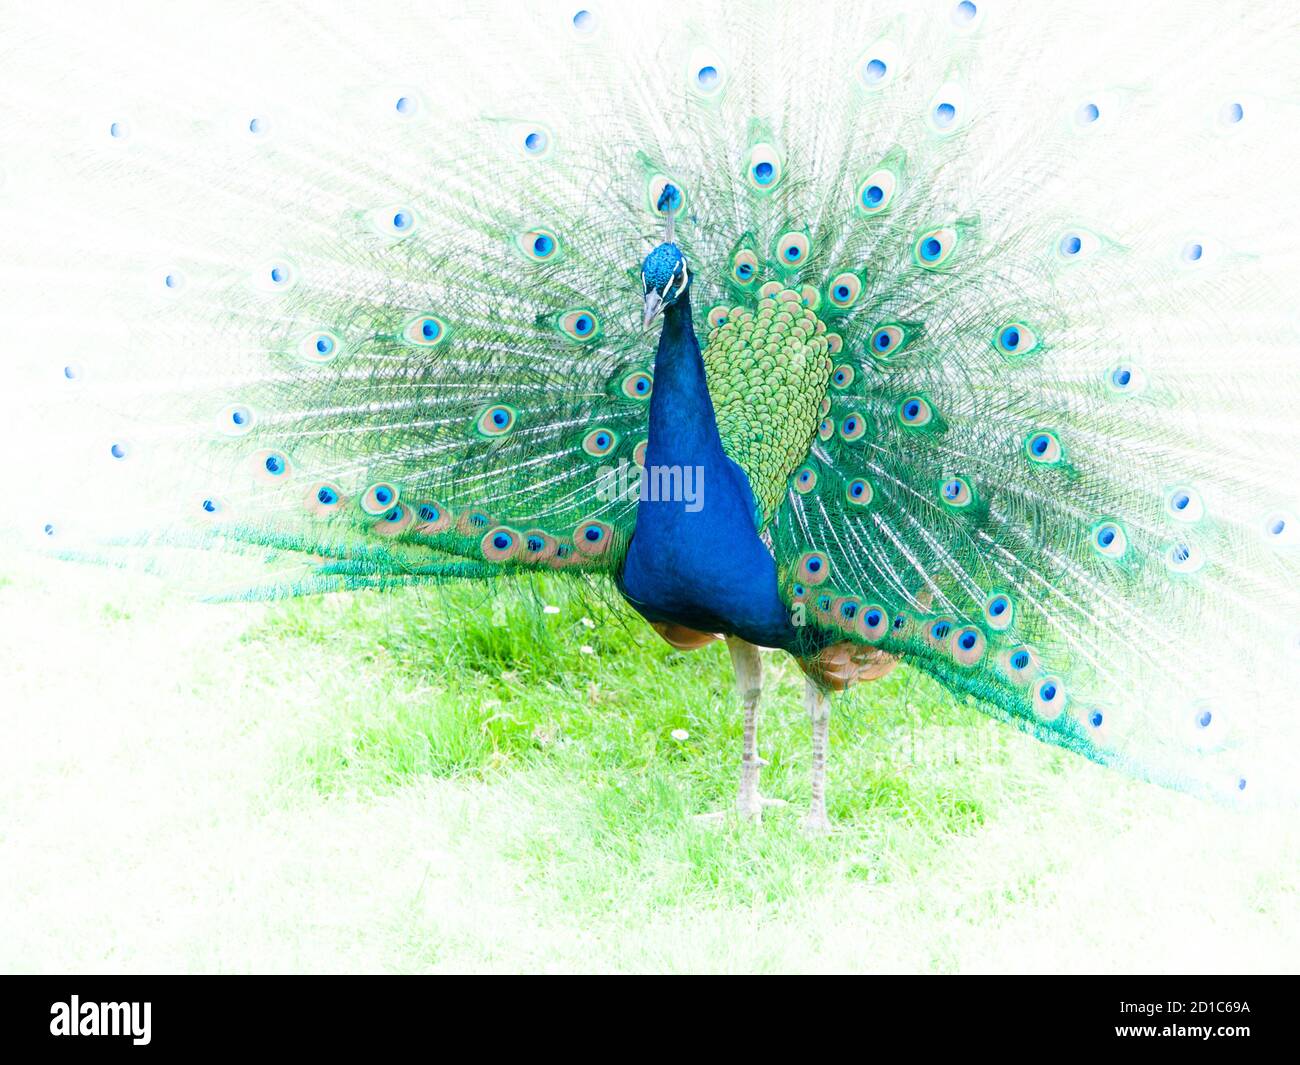 Portrait of peacock with spread feathers. Image with white edges. Stock Photo